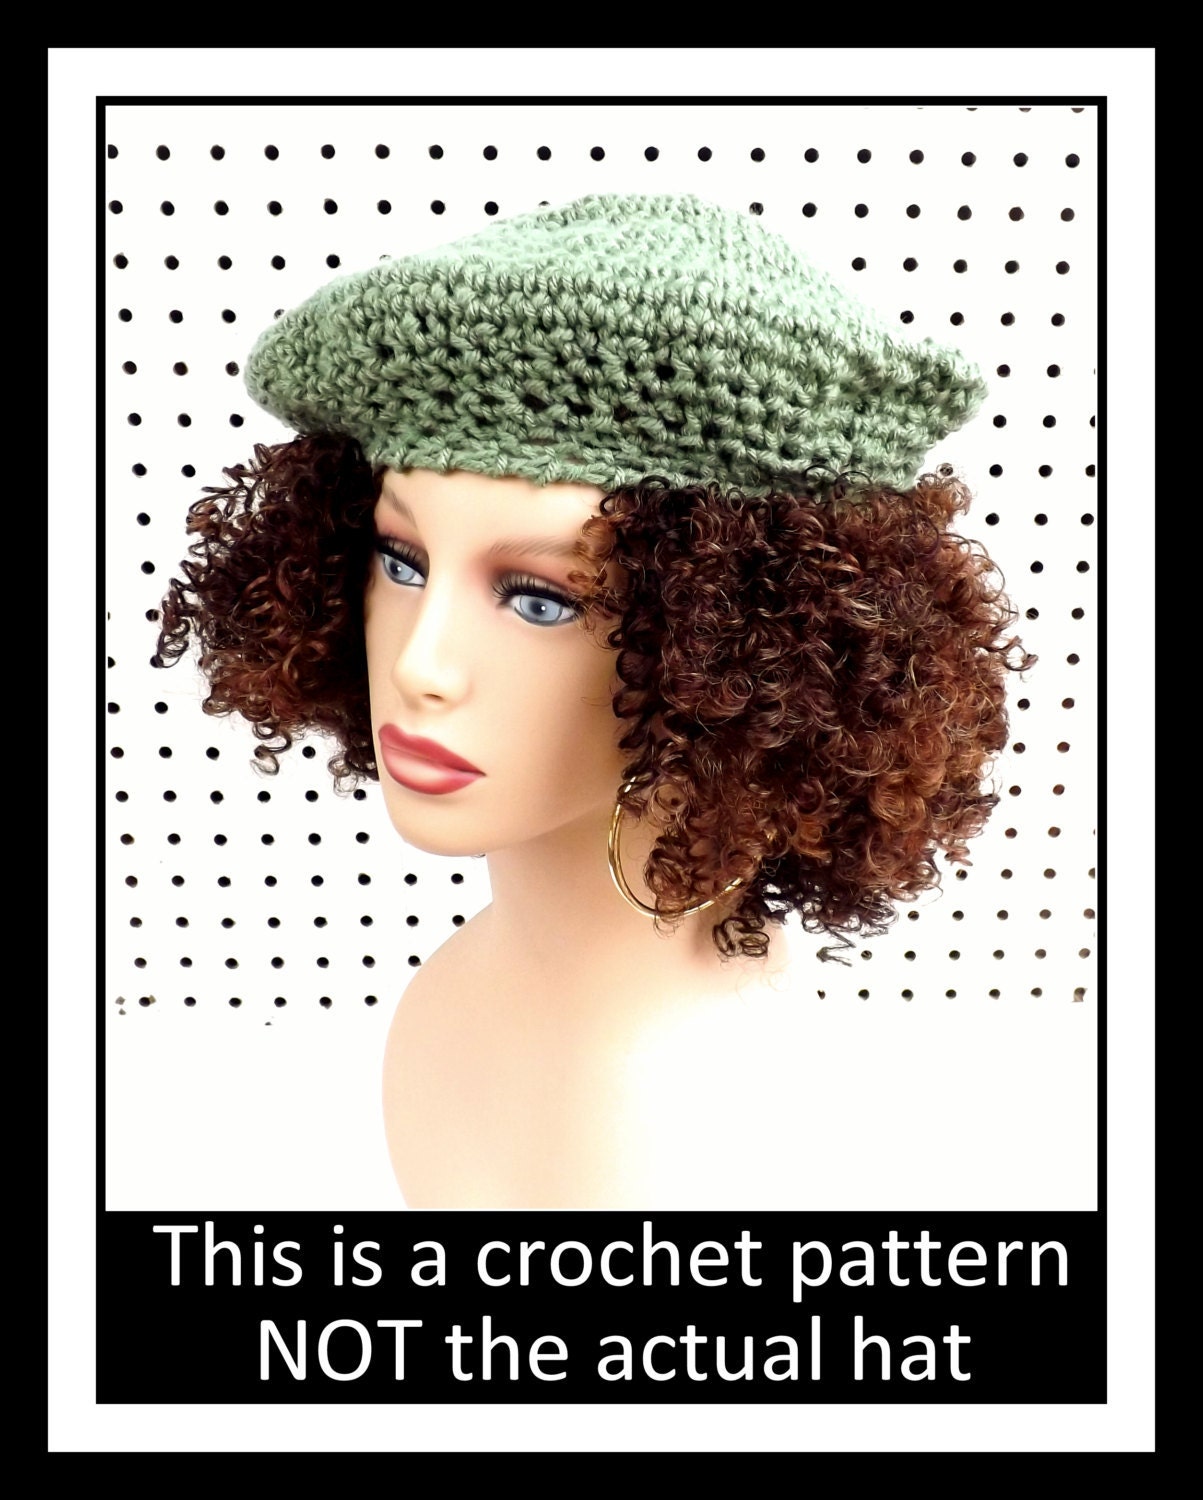 French Artist Crochet Beret Hat Pattern For Beginners Easy Tutorial Step By Step Diy Womens Tam Wear With A Short Bob Or Any Hairstyle